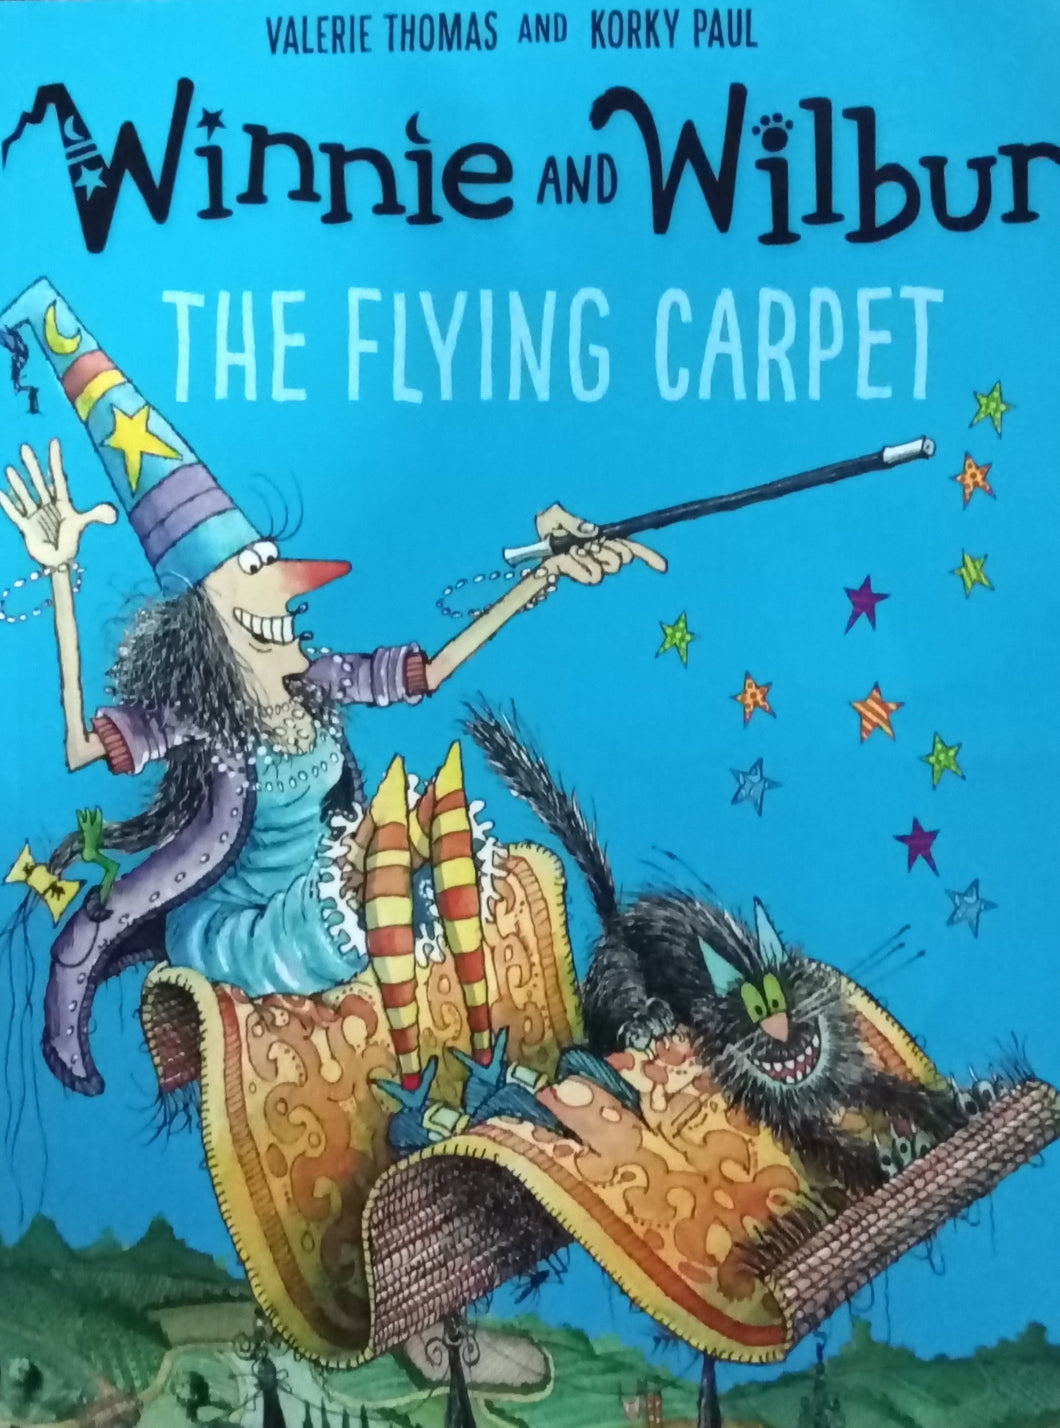 Winnie and Wilbur the Flying Carpet by Valerie Thomas